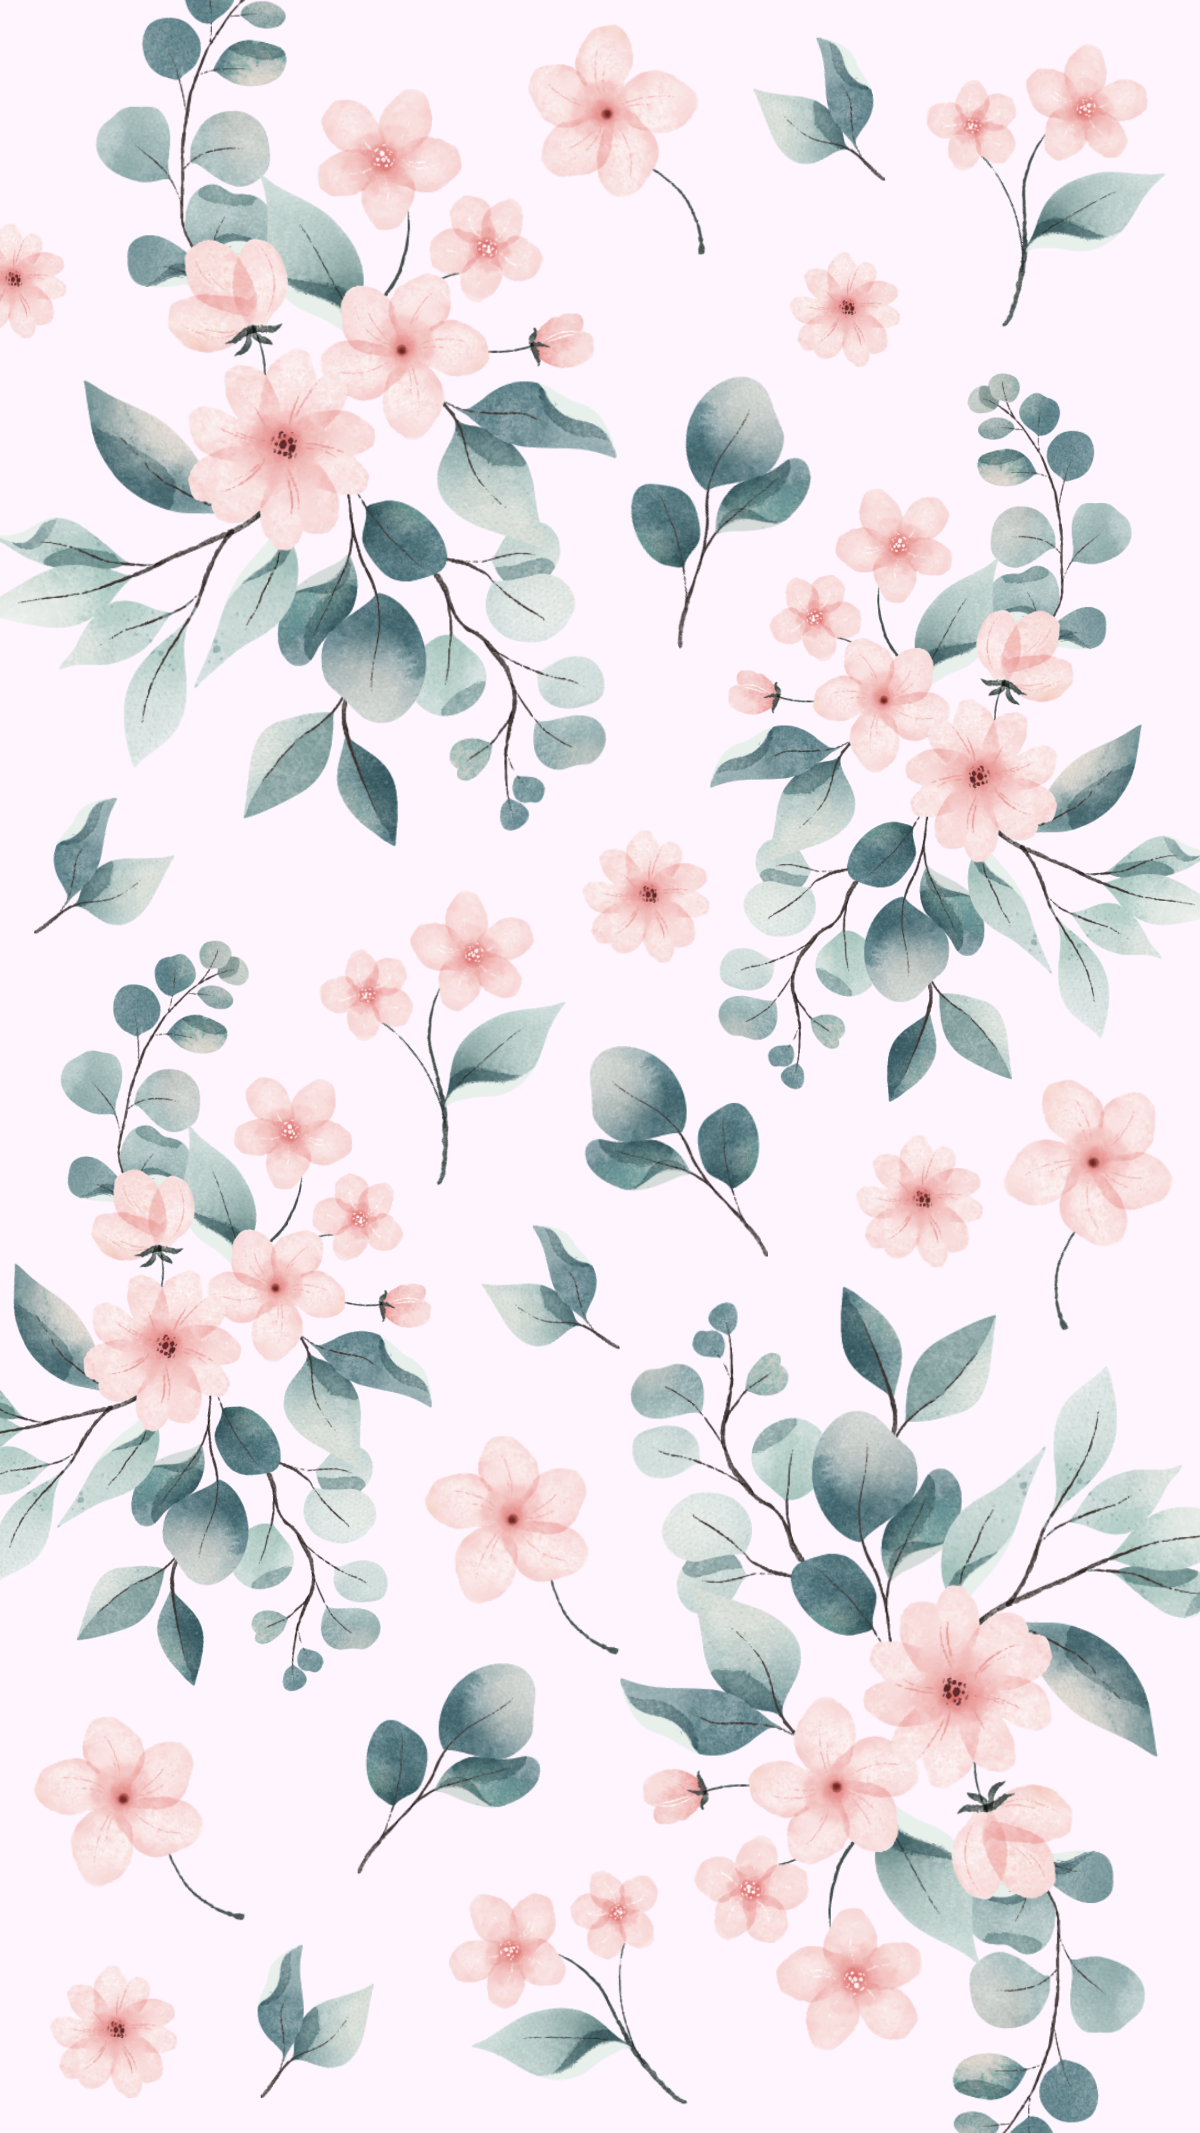 Watercolor iPhone Floral Background Template